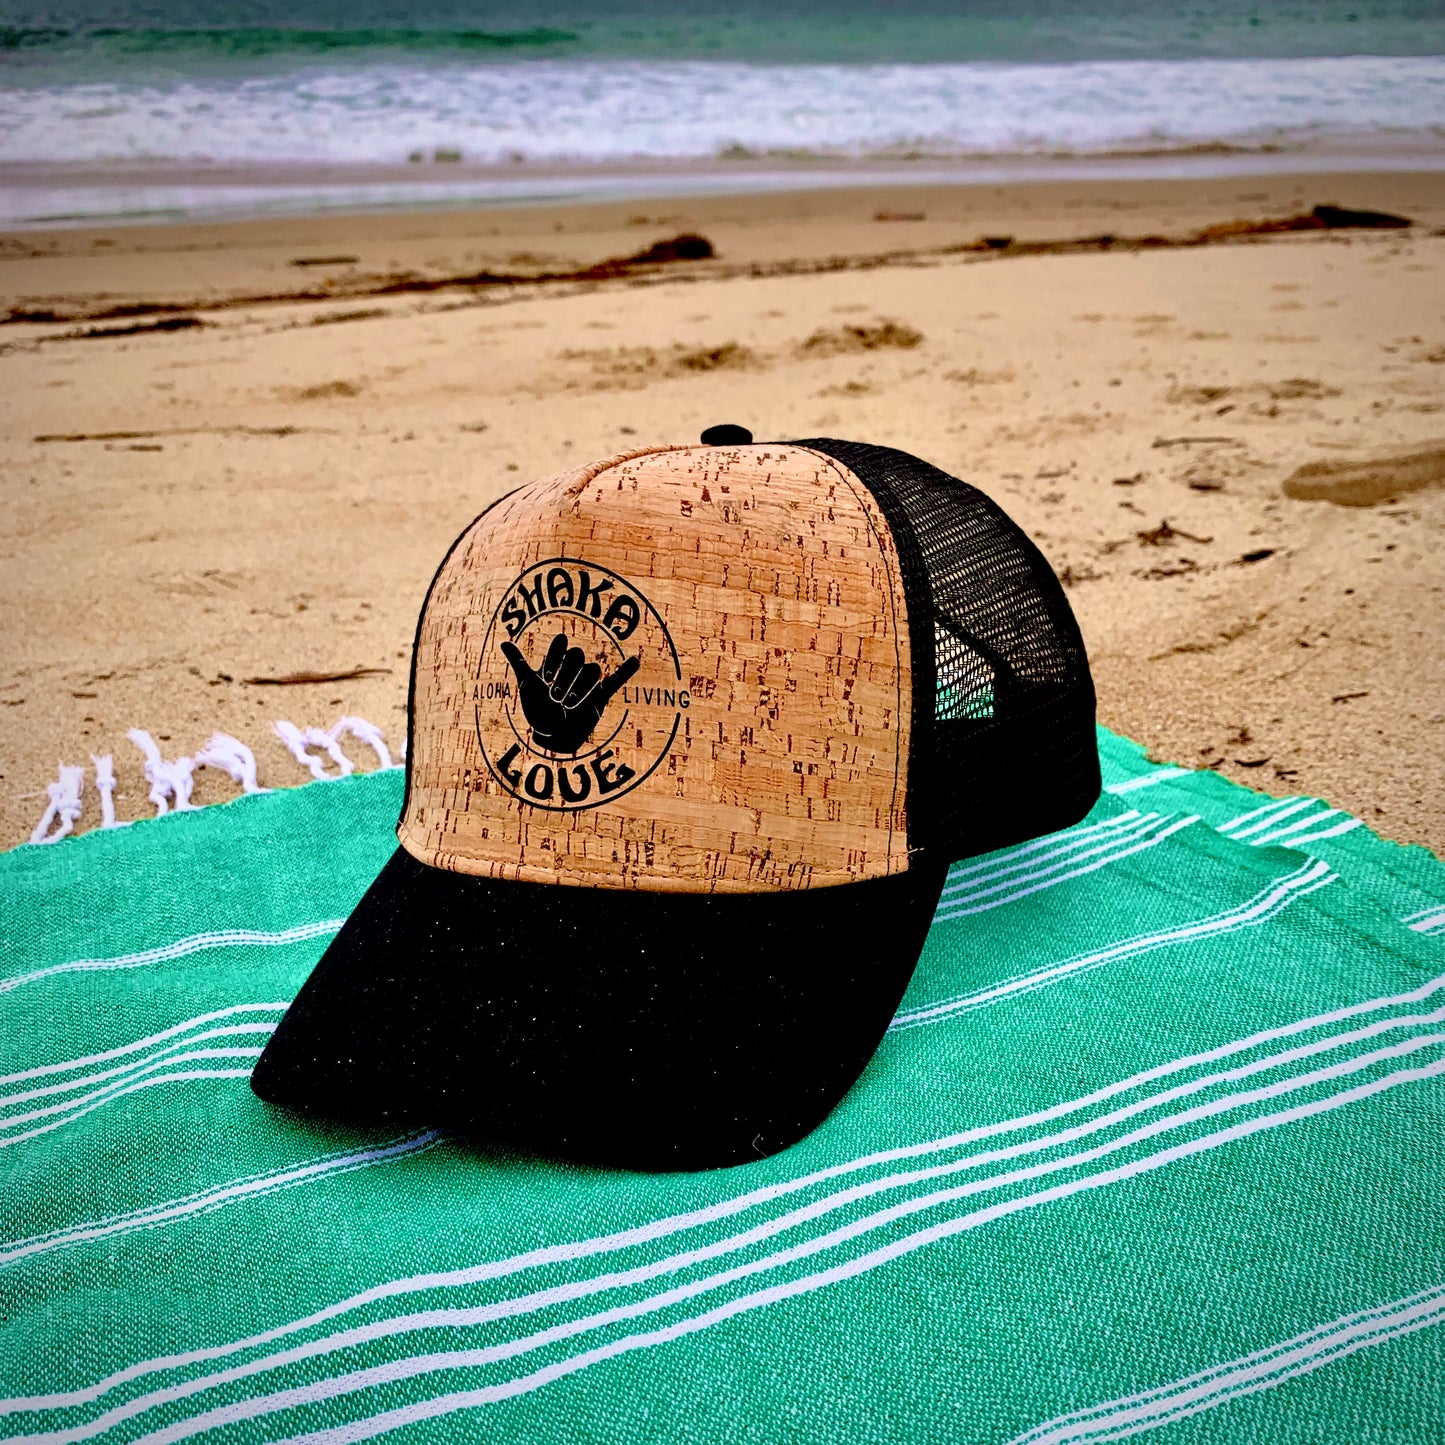 Bundle #7: Includes Your Choice of SHAKA Hat & Towel